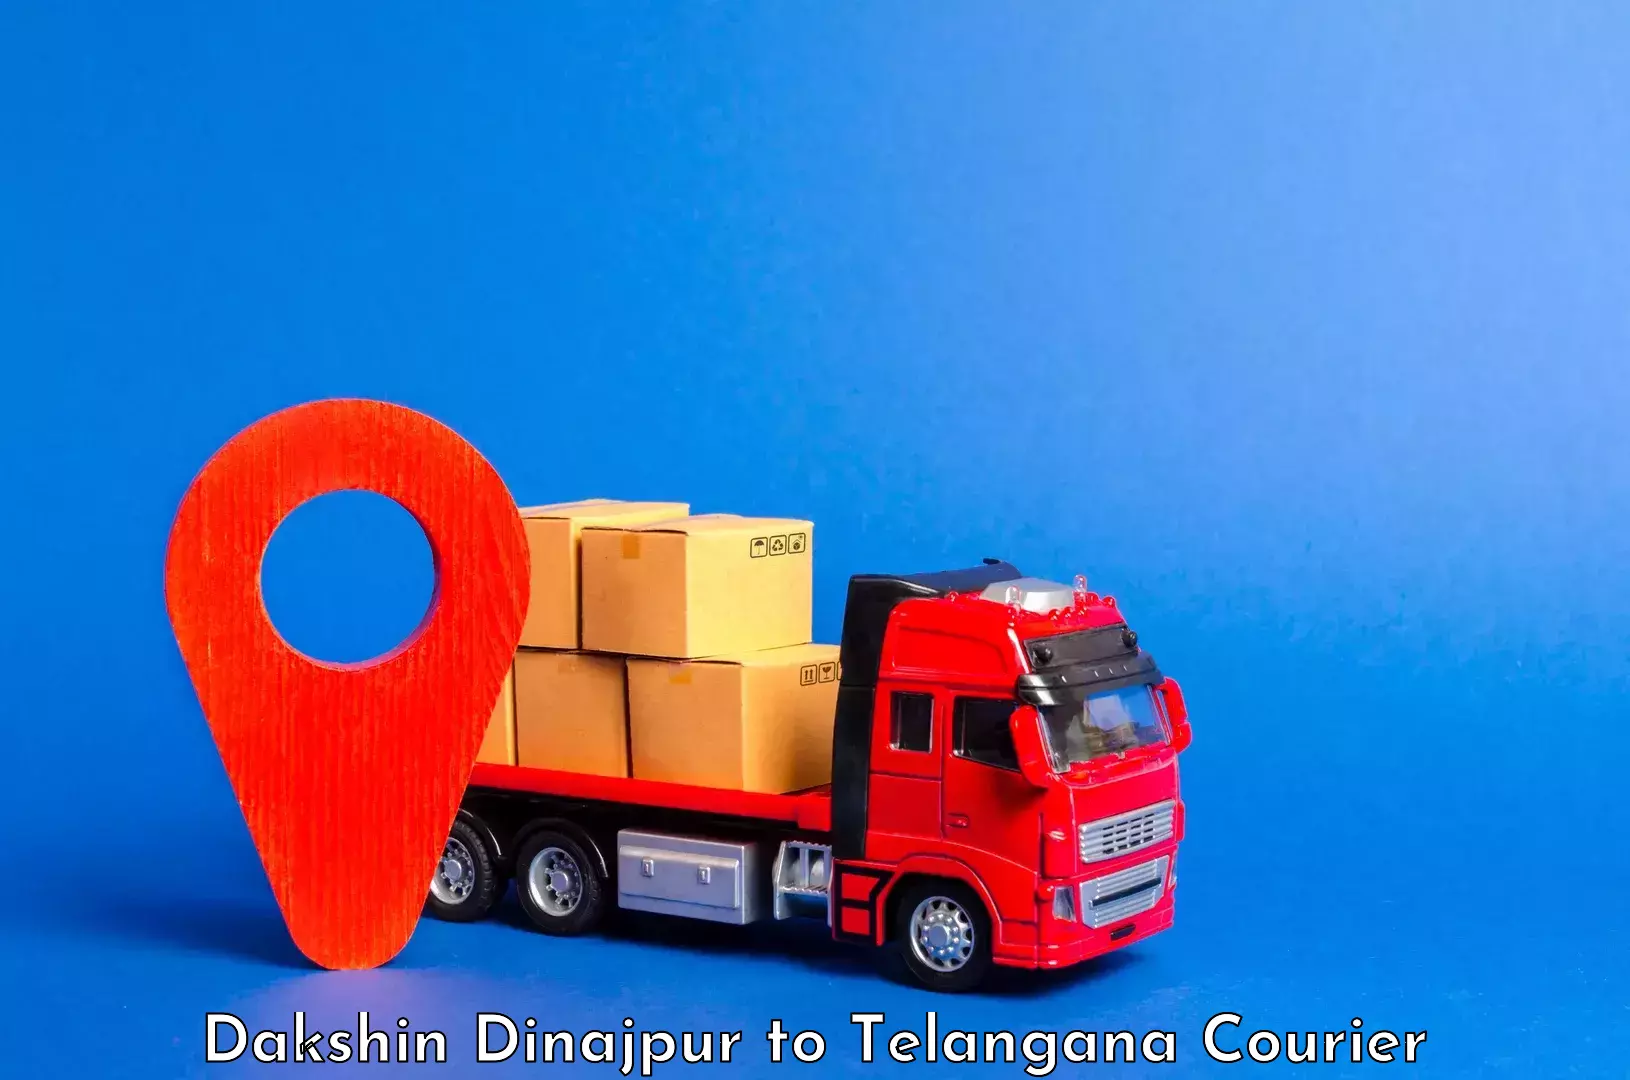 Luggage delivery app Dakshin Dinajpur to Sultanabad